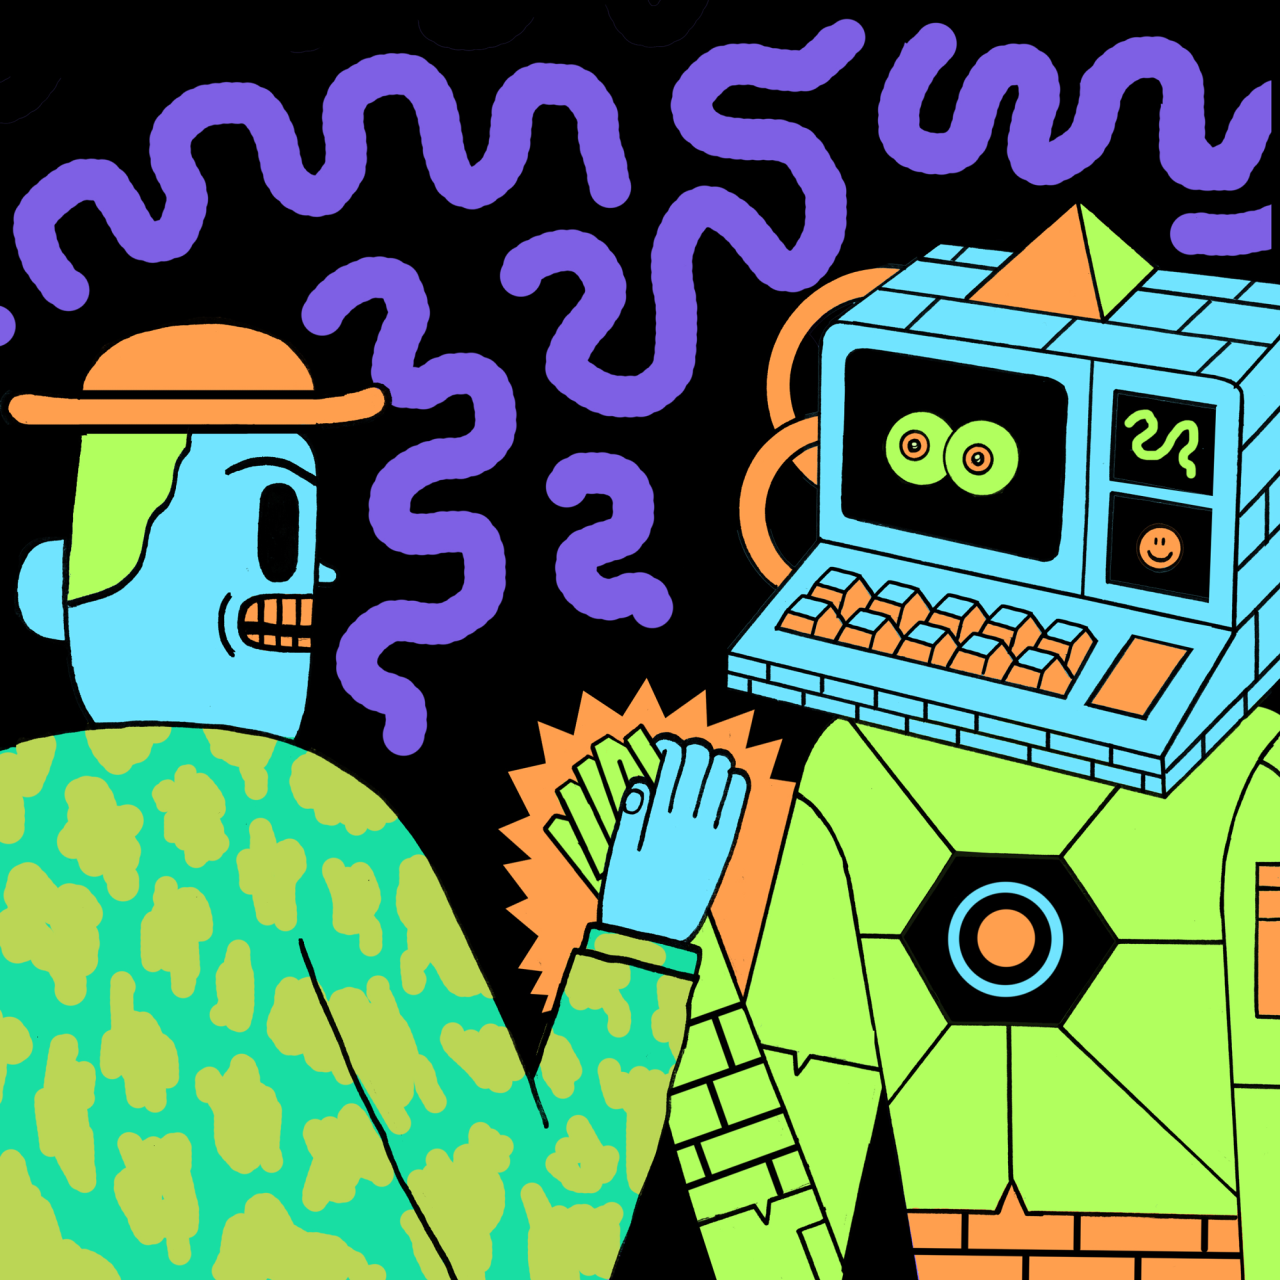 <b><a href="https://www.technologyreview.com/s/602278/ai-wants-to-be-your-bro-not-your-foe/">AI Wants to Be Your Bro, Not Your Foe. </a></b><br> Illustration by John Malta